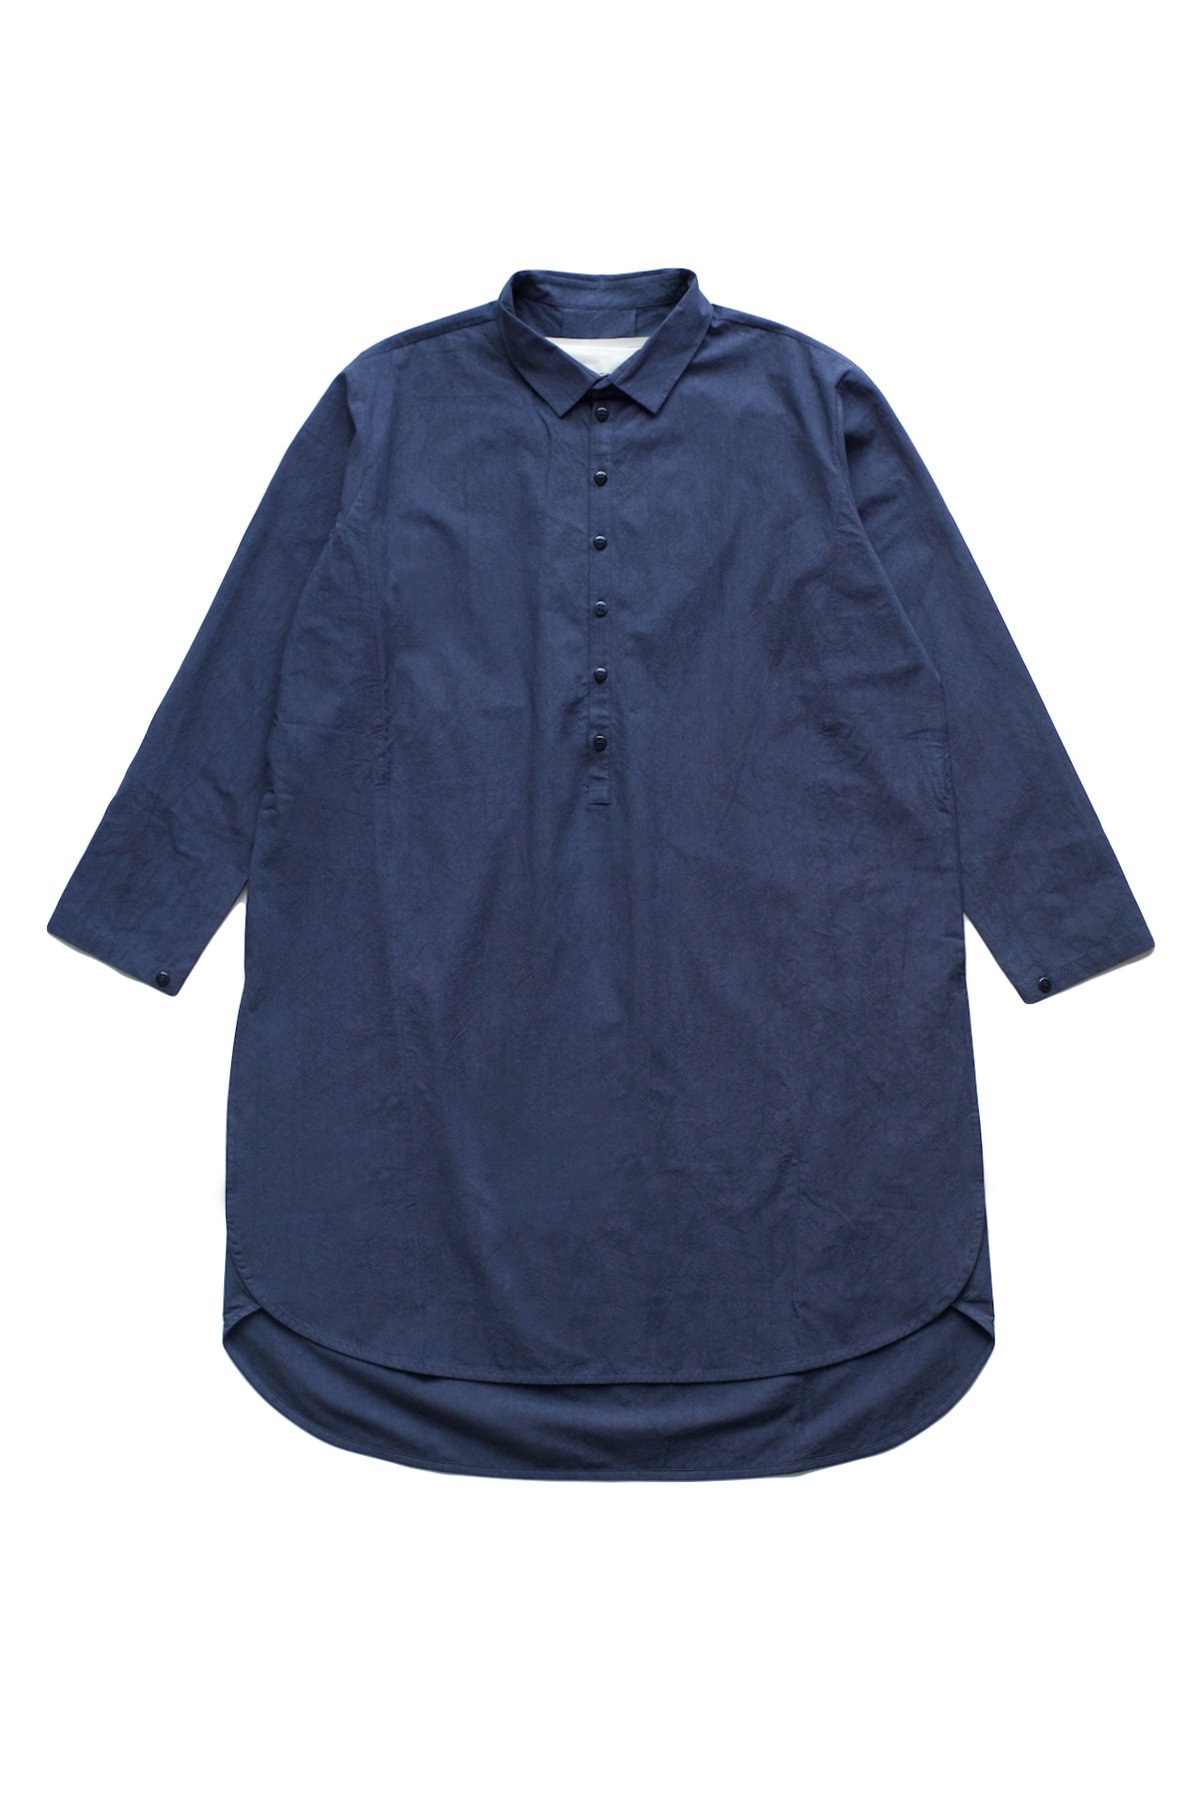 toogood - THE BAKER TUNIC - WASHED COTTON - INK PRICE 71,500 tax-in 